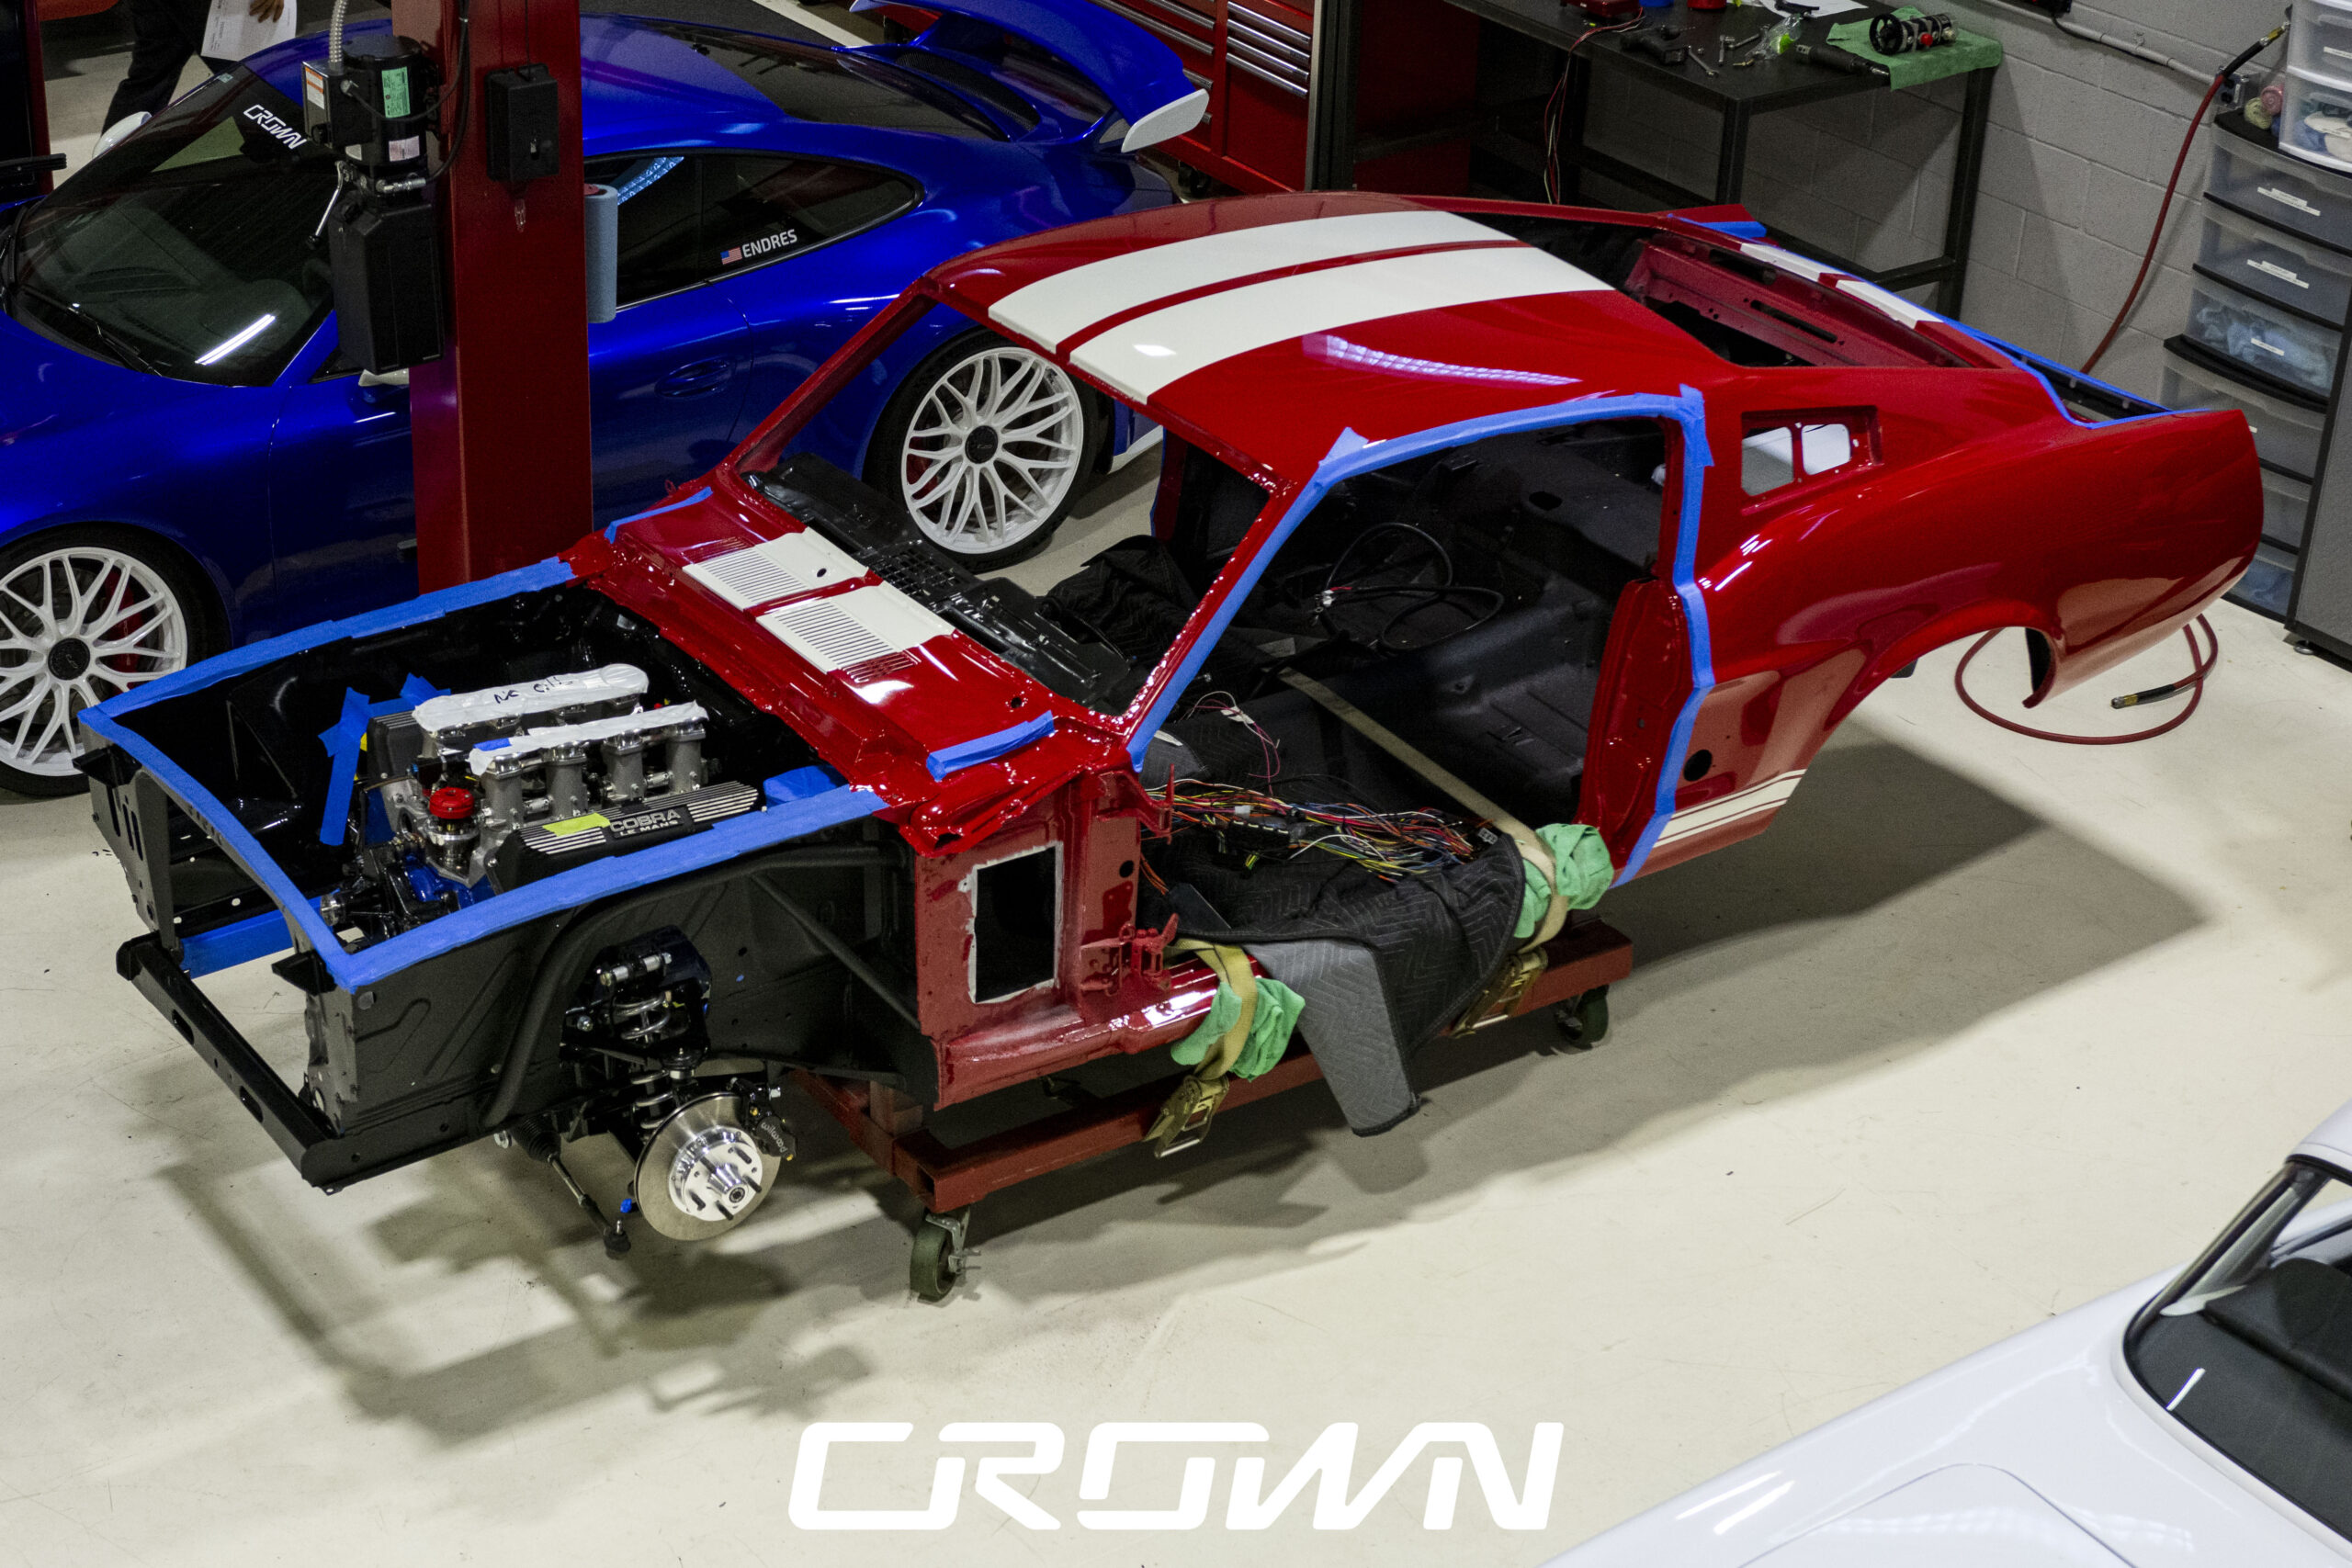 The Crown Customs 1968 Shelby GT500 gets some upgrades, check out the progress.